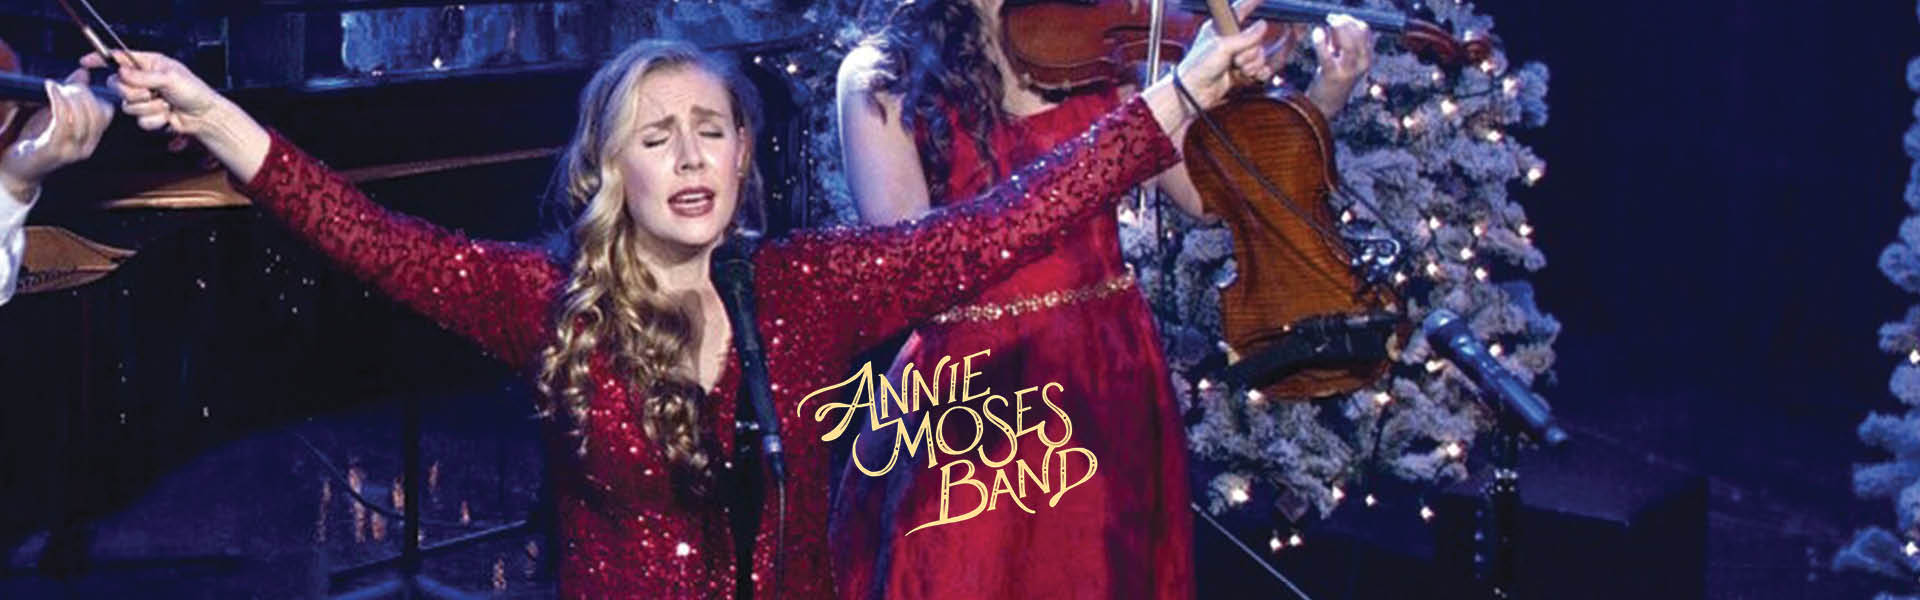 Picture of Annie Moses band